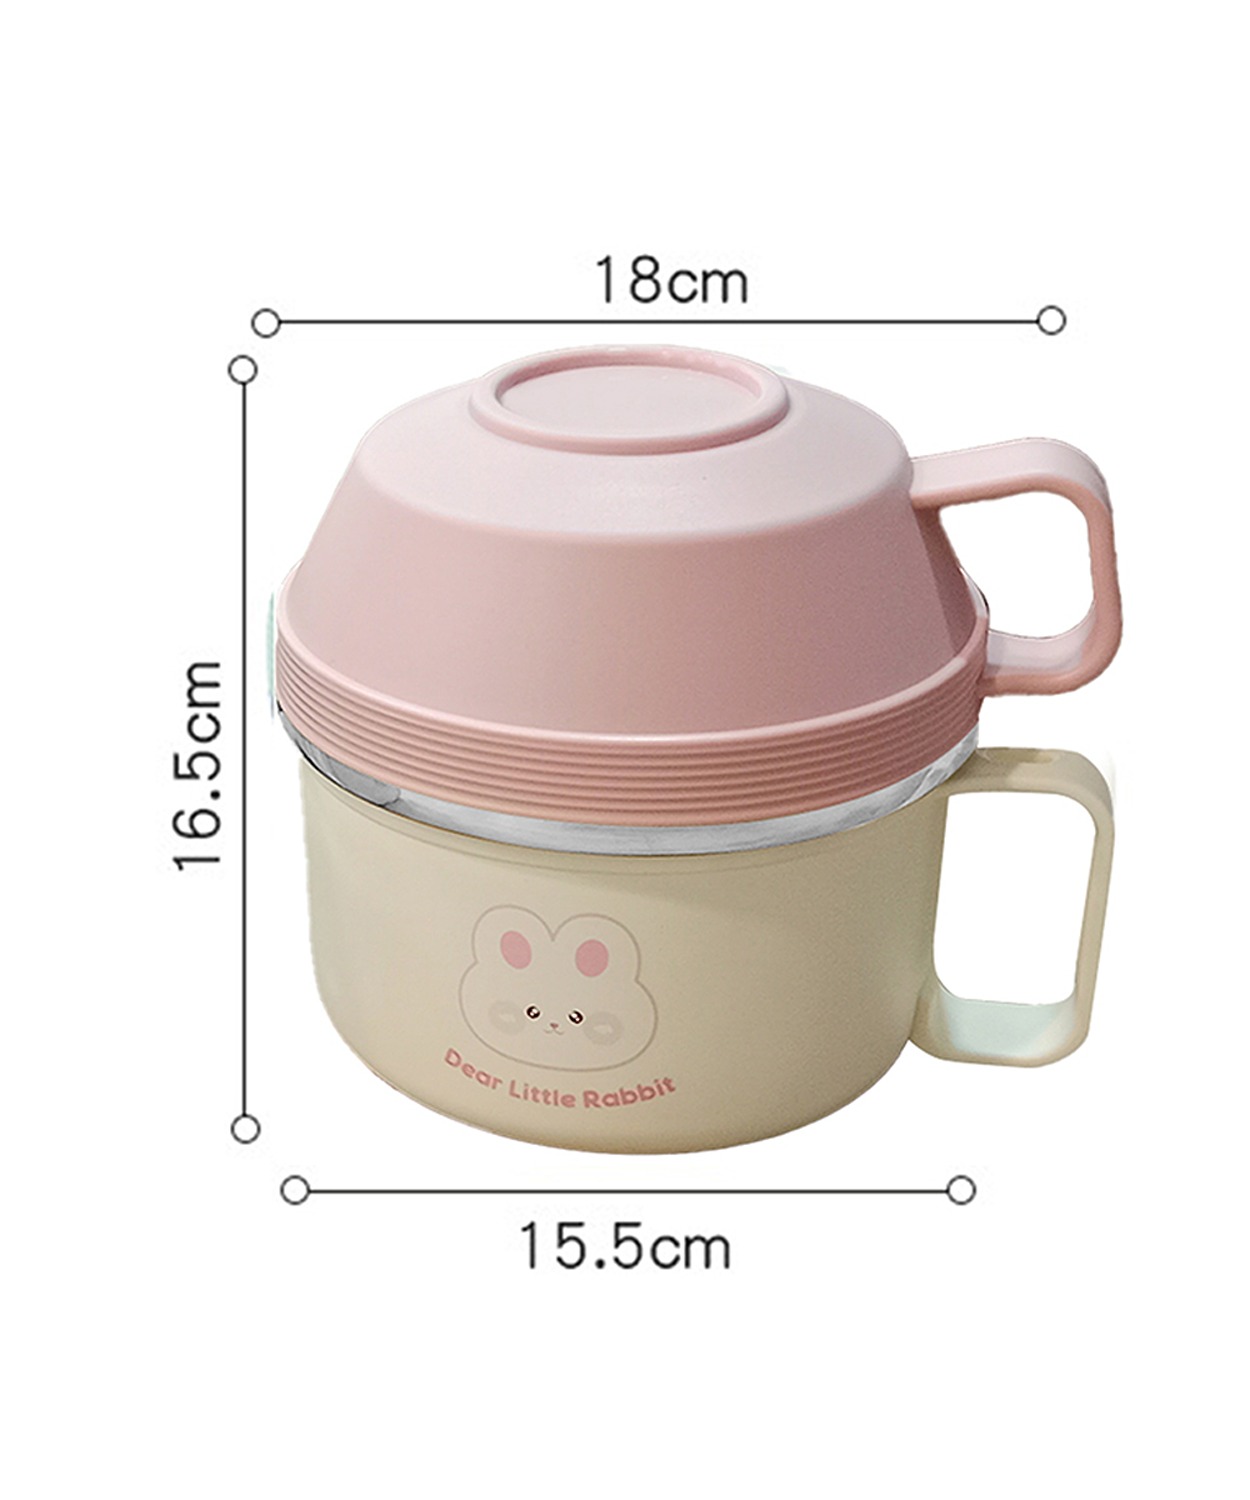 Cream & Pink Rabbit , Dual Handle Lunch Box With Cover